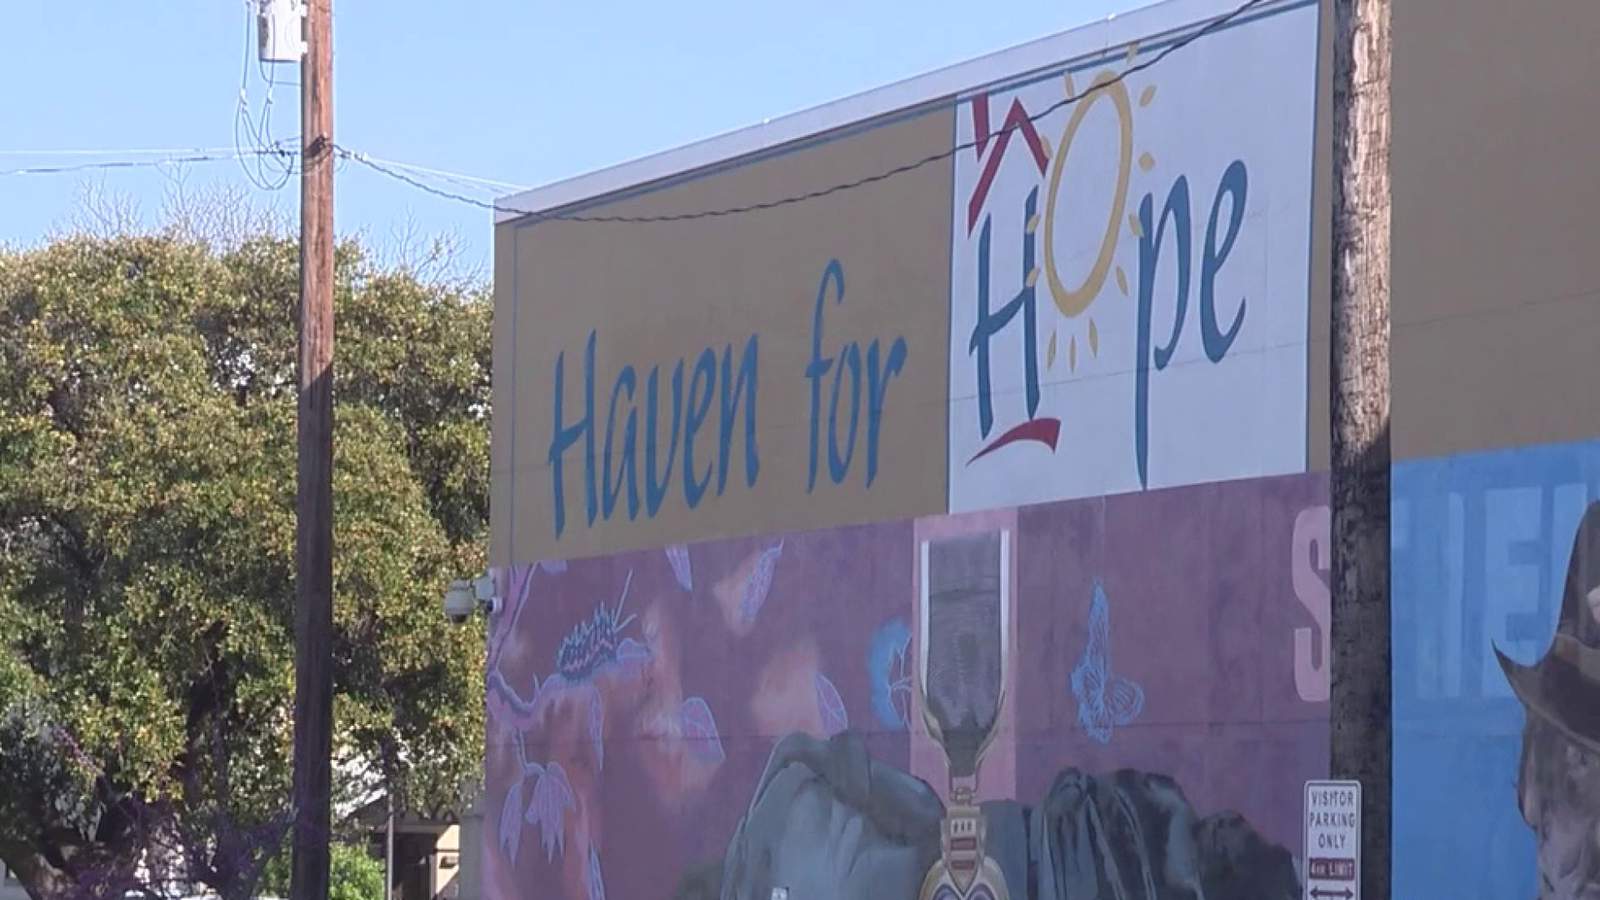 Nonprofit provides resources for San Antonios homeless population amid COVID-19 pandemic